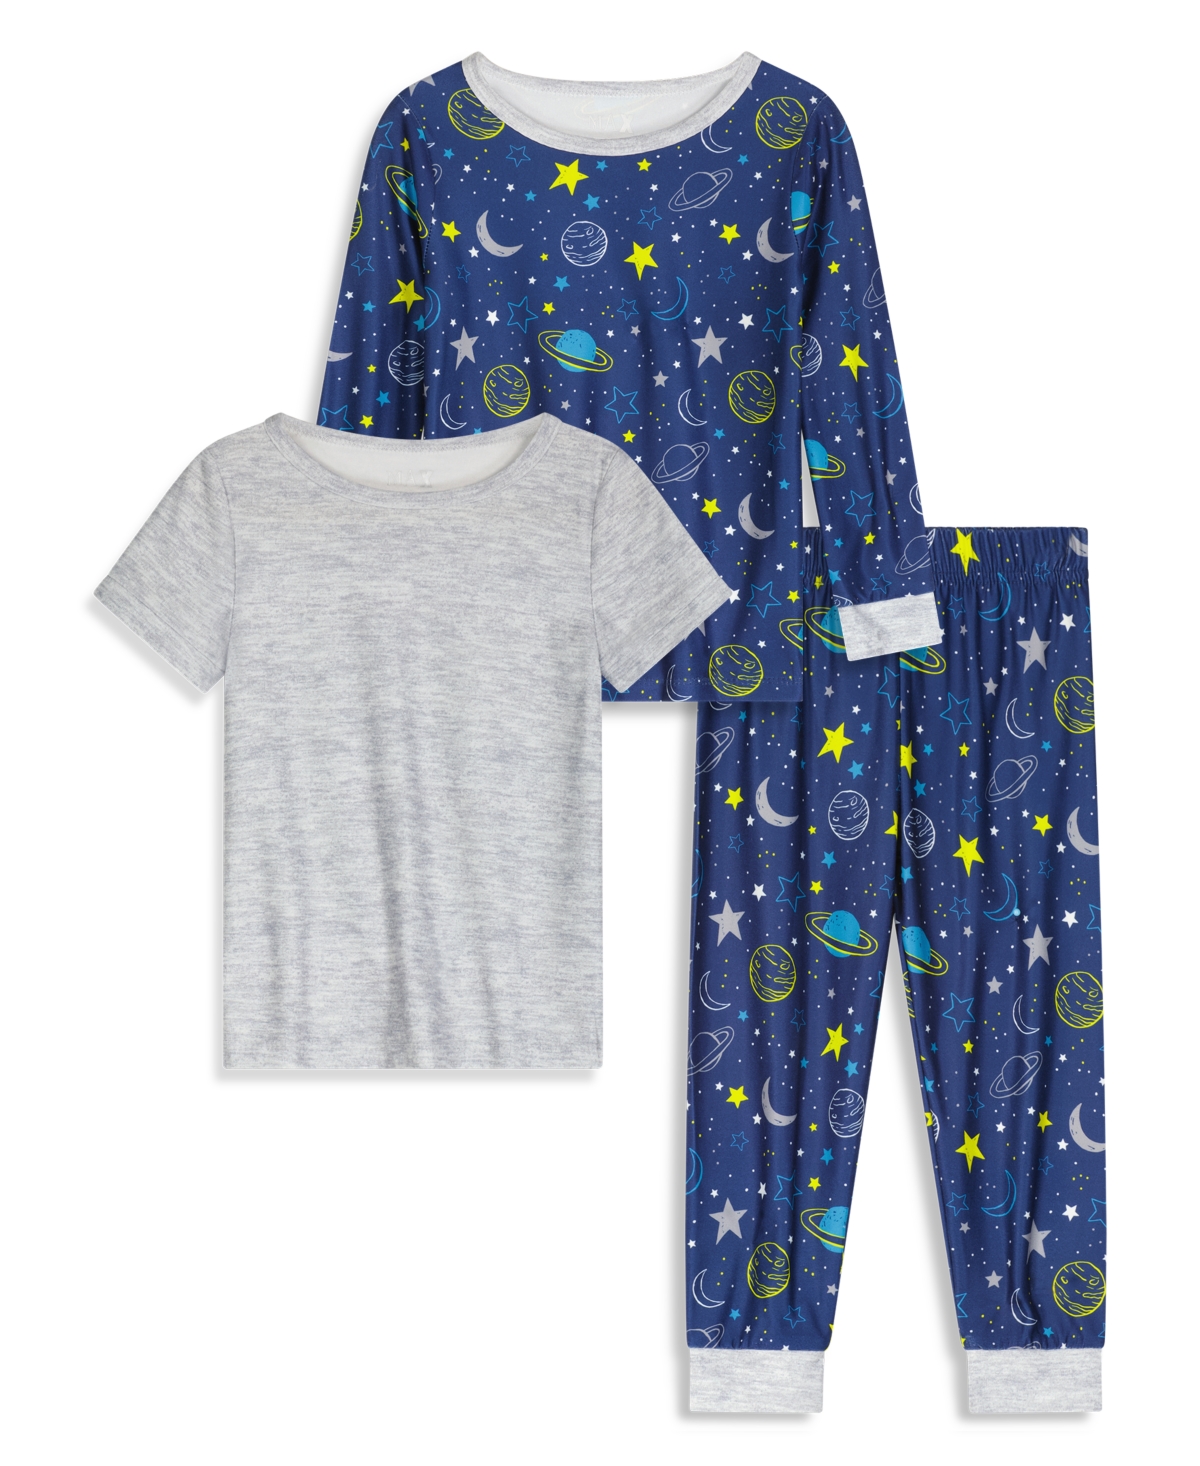 Shop Max & Olivia Toddler Boys Snug Fit Pajama With Pant, Long Sleeve T-shirt And Short Sleeve T-shirt, 3 Piece Set In Gray